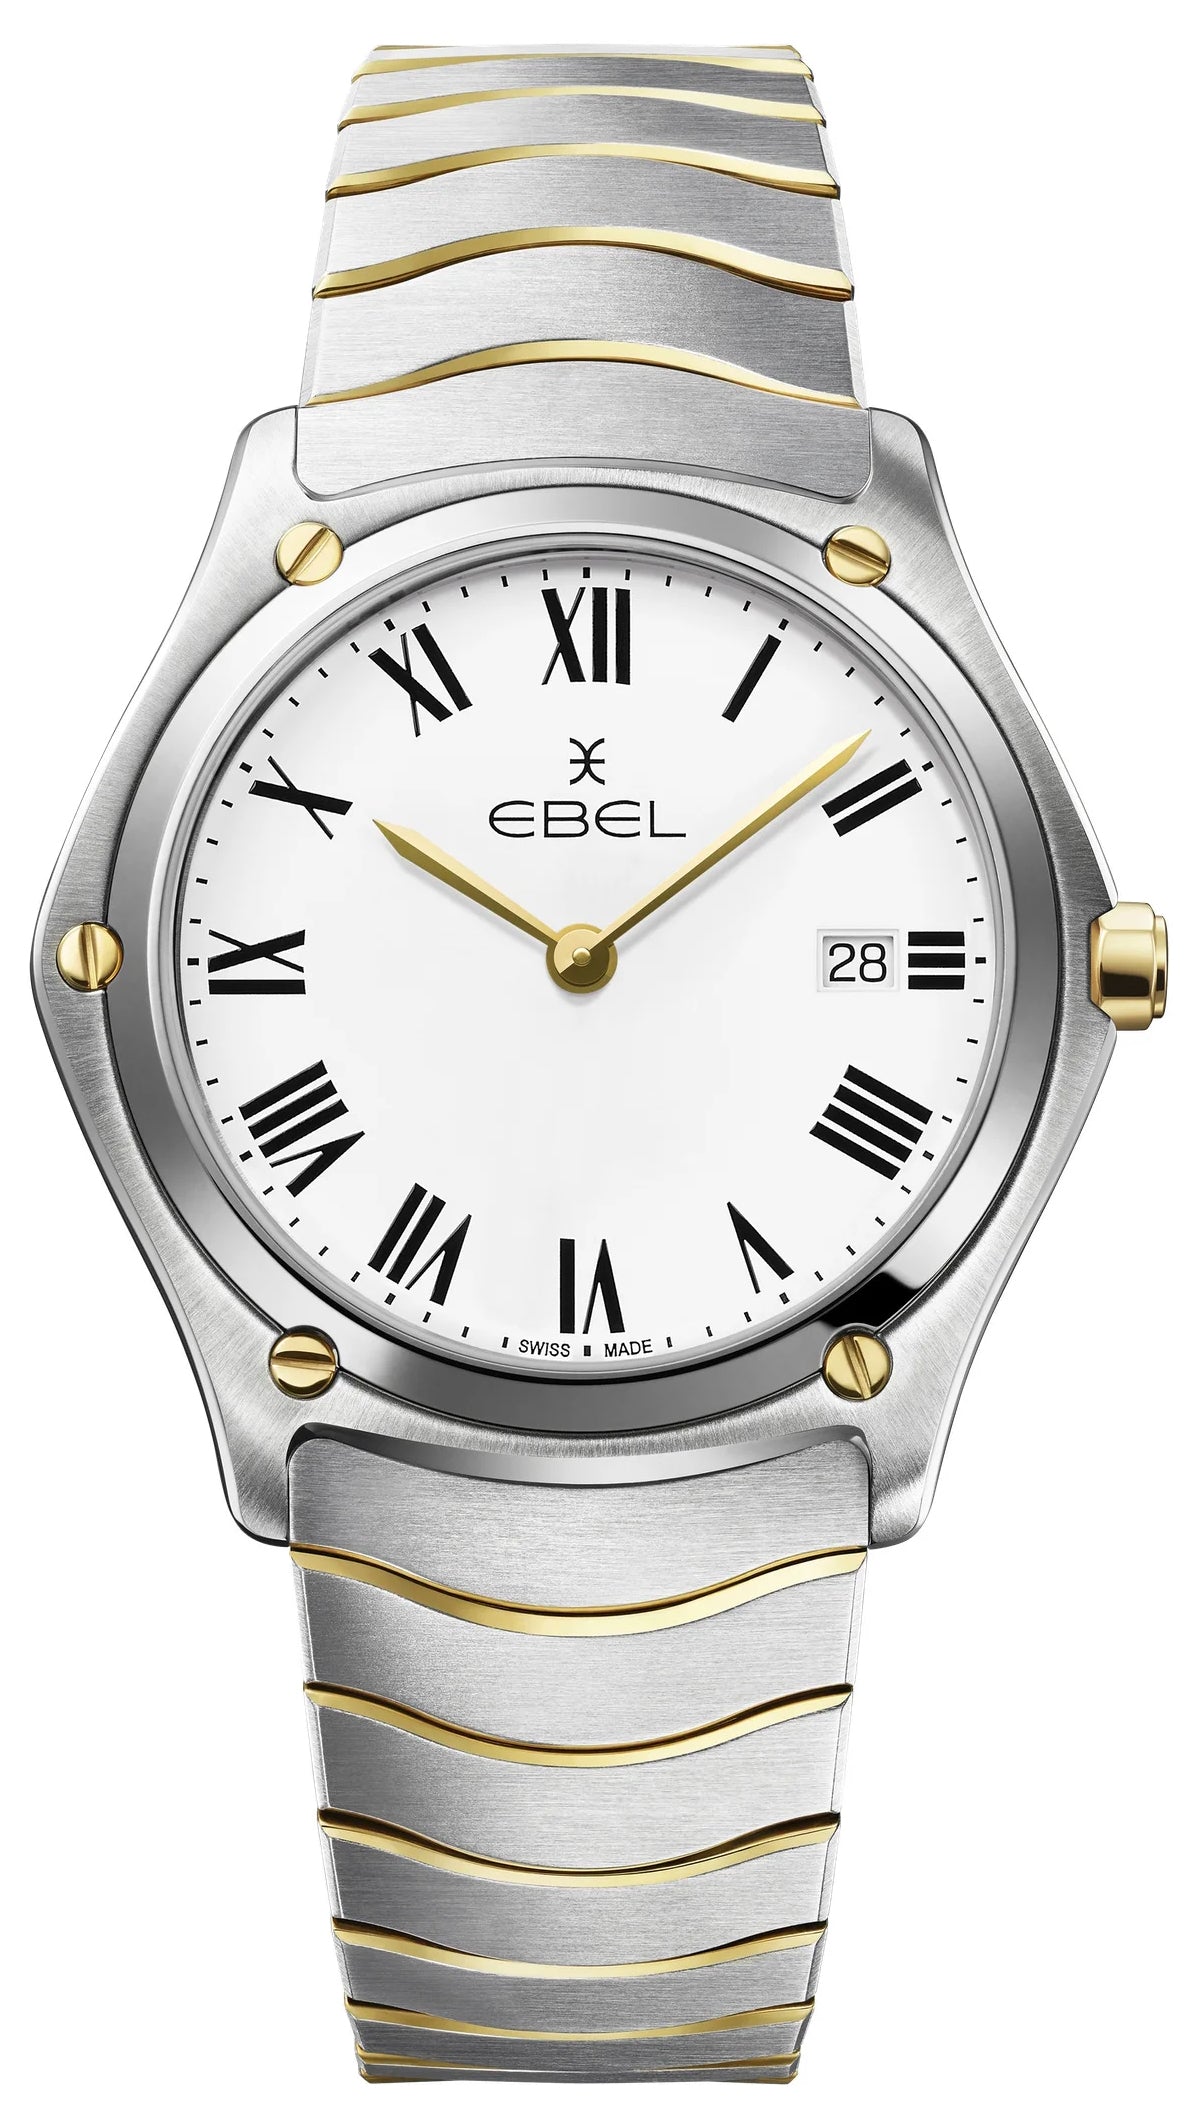 update alt-text with template Watches - Mens-Ebel-1216567-35 - 40 mm, 40 - 45 mm, date, Ebel, mens, menswatches, new arrivals, round, rpSKU_1216200, rpSKU_1216342, rpSKU_123.20.35.20.58.001, rpSKU_L49044116, rpSKU_M0A10622, Sport Classic, stainless steel band, stainless steel case, swiss quartz, two-tone band, watches, white-Watches & Beyond